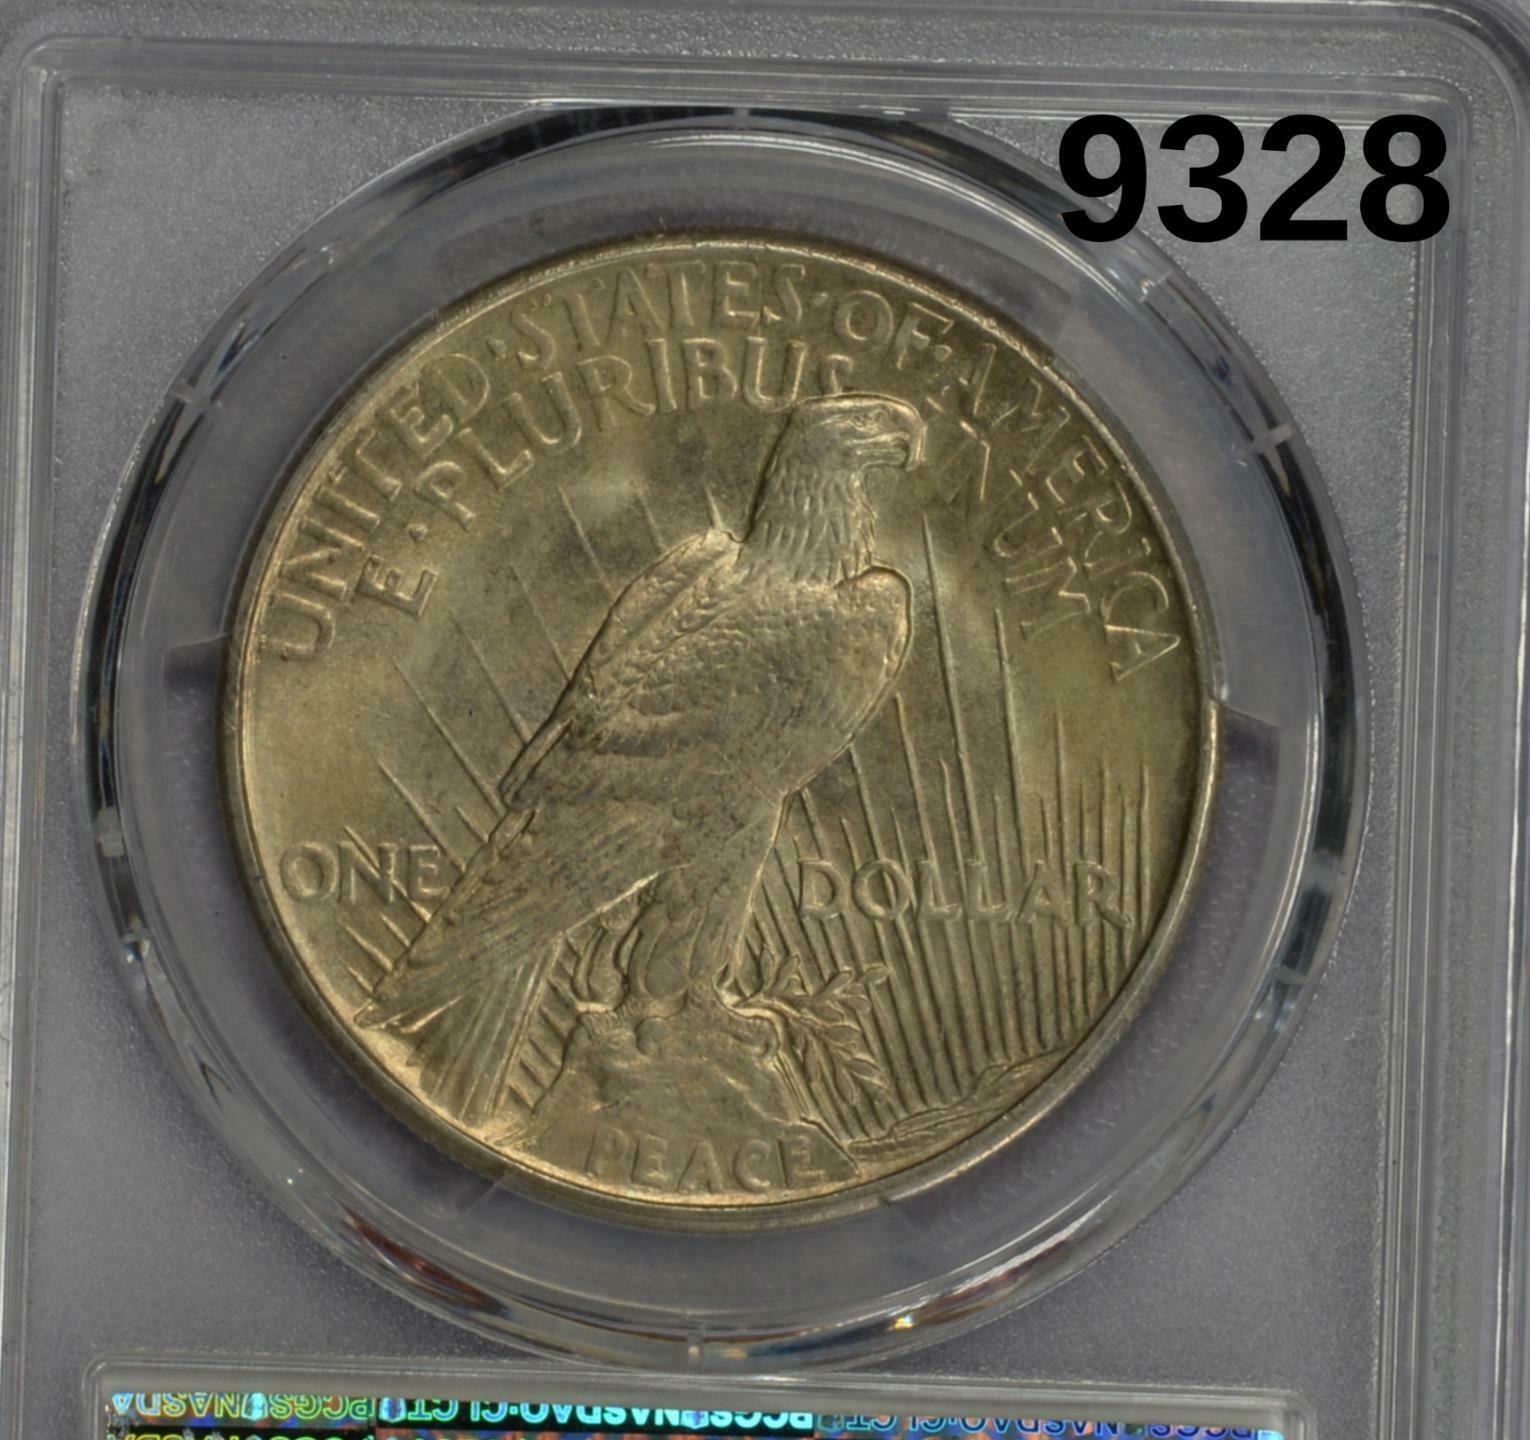 1921 PEACE SILVER DOLLAR PCGS CERTIFIED MS65 PALE GOLDEN WOW! #9328